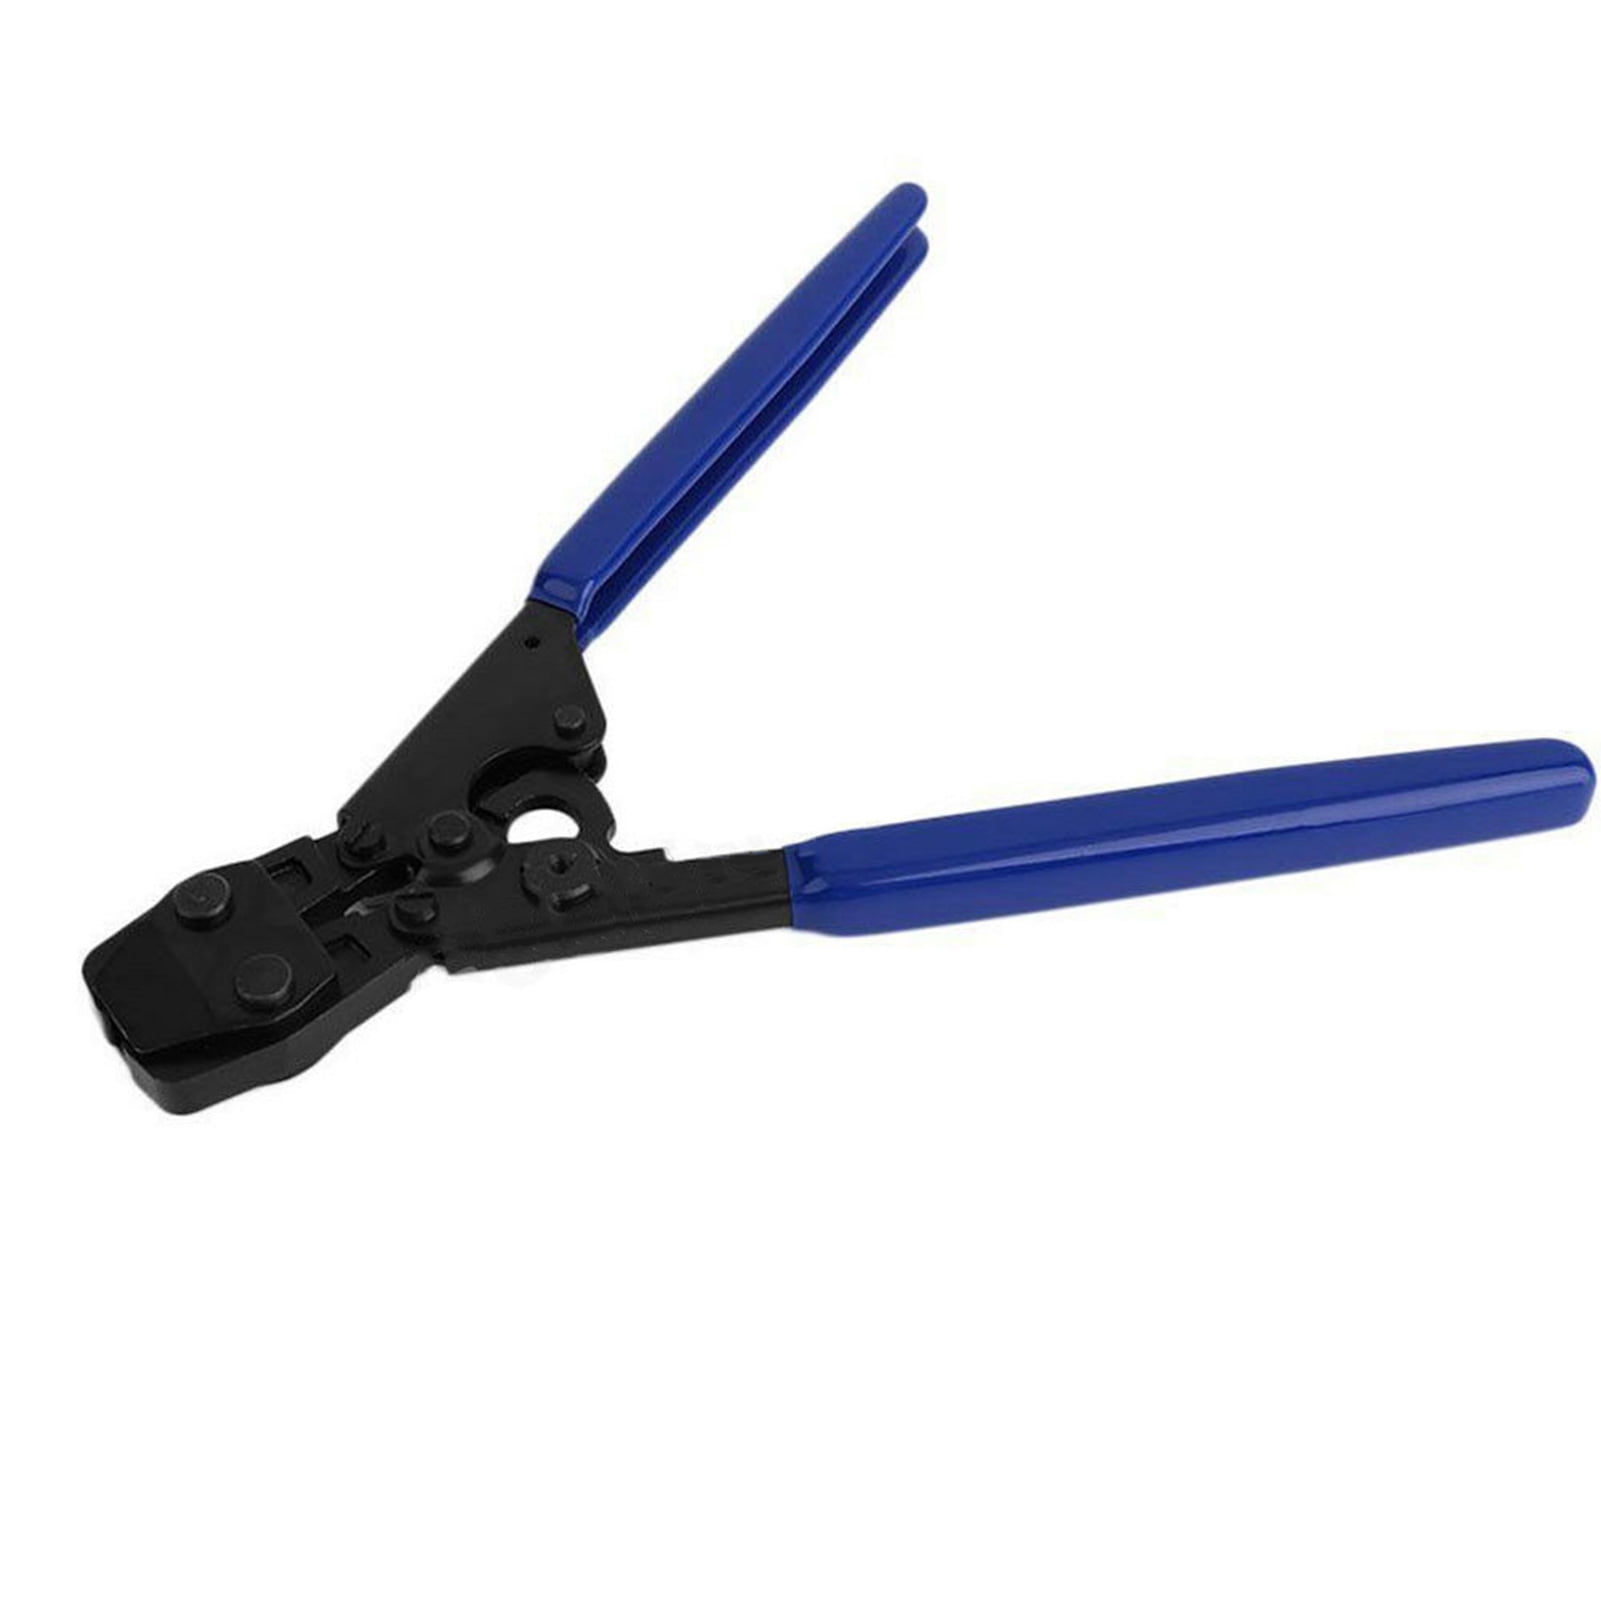 PEX Cinch Crimp Crimper Crimping Tool For SS Hose Clamps Sizes from 3/8" to 1" 